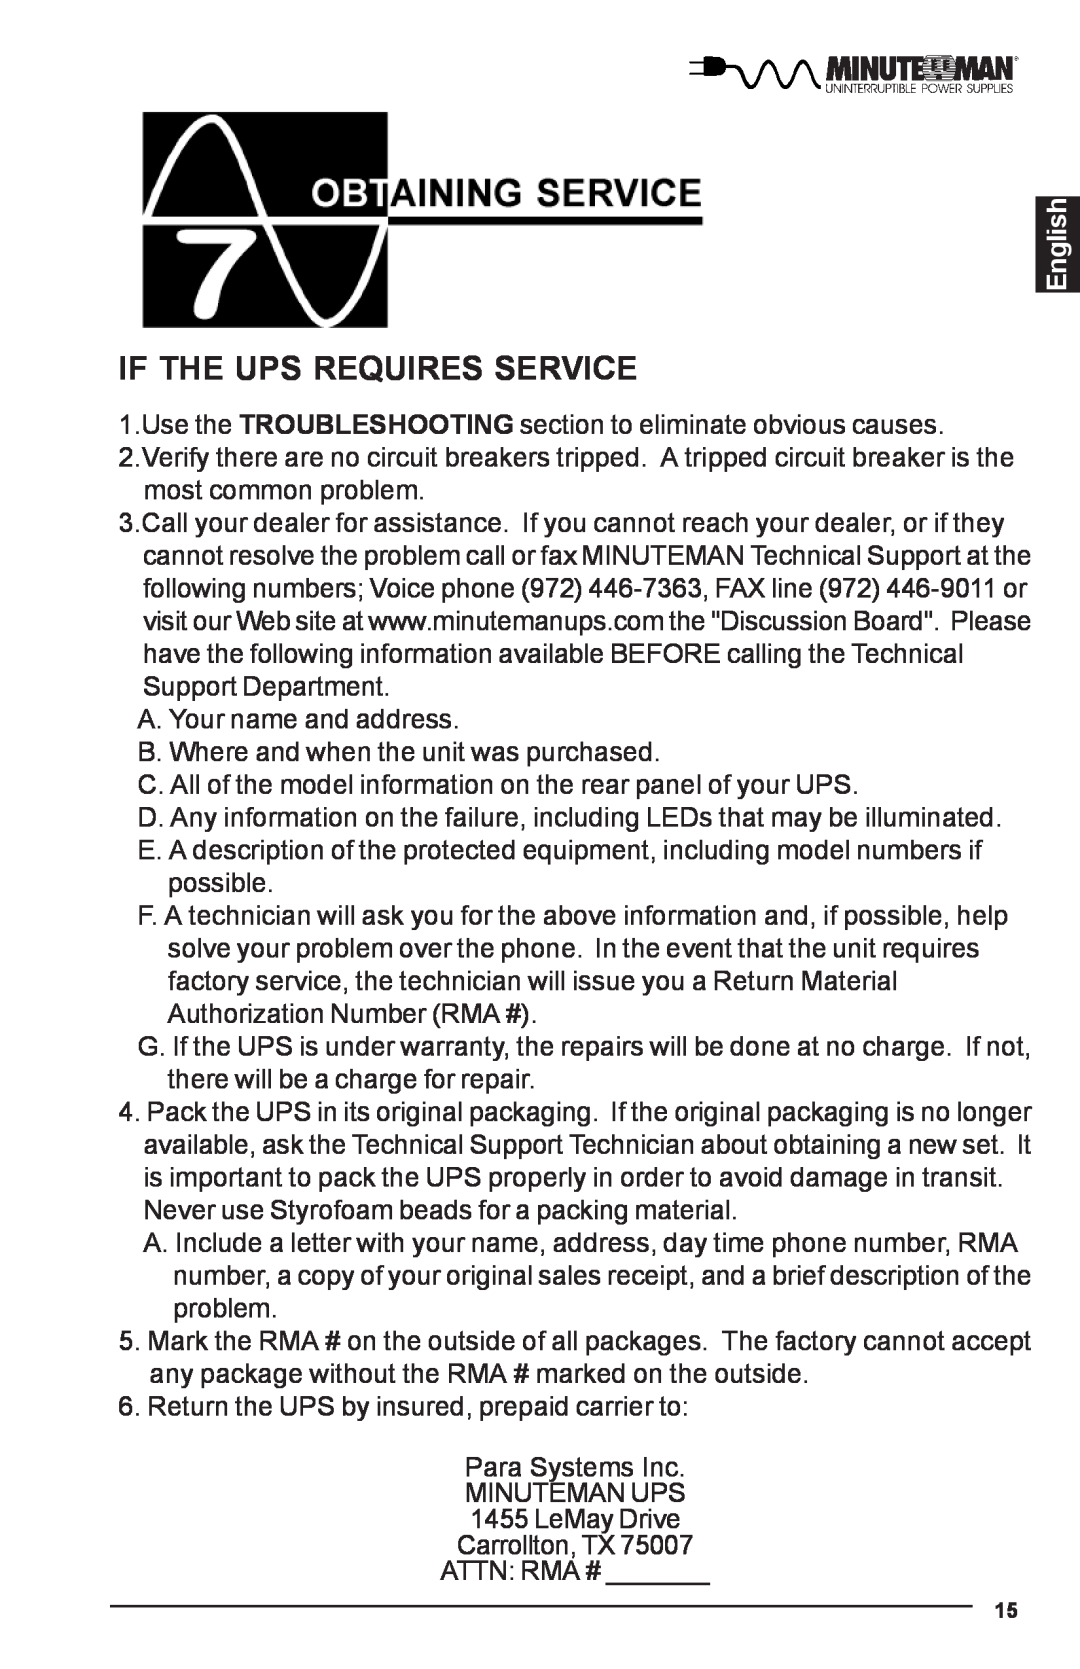 Minuteman UPS MBK-E SERIES user manual If The Ups Requires Service, English 